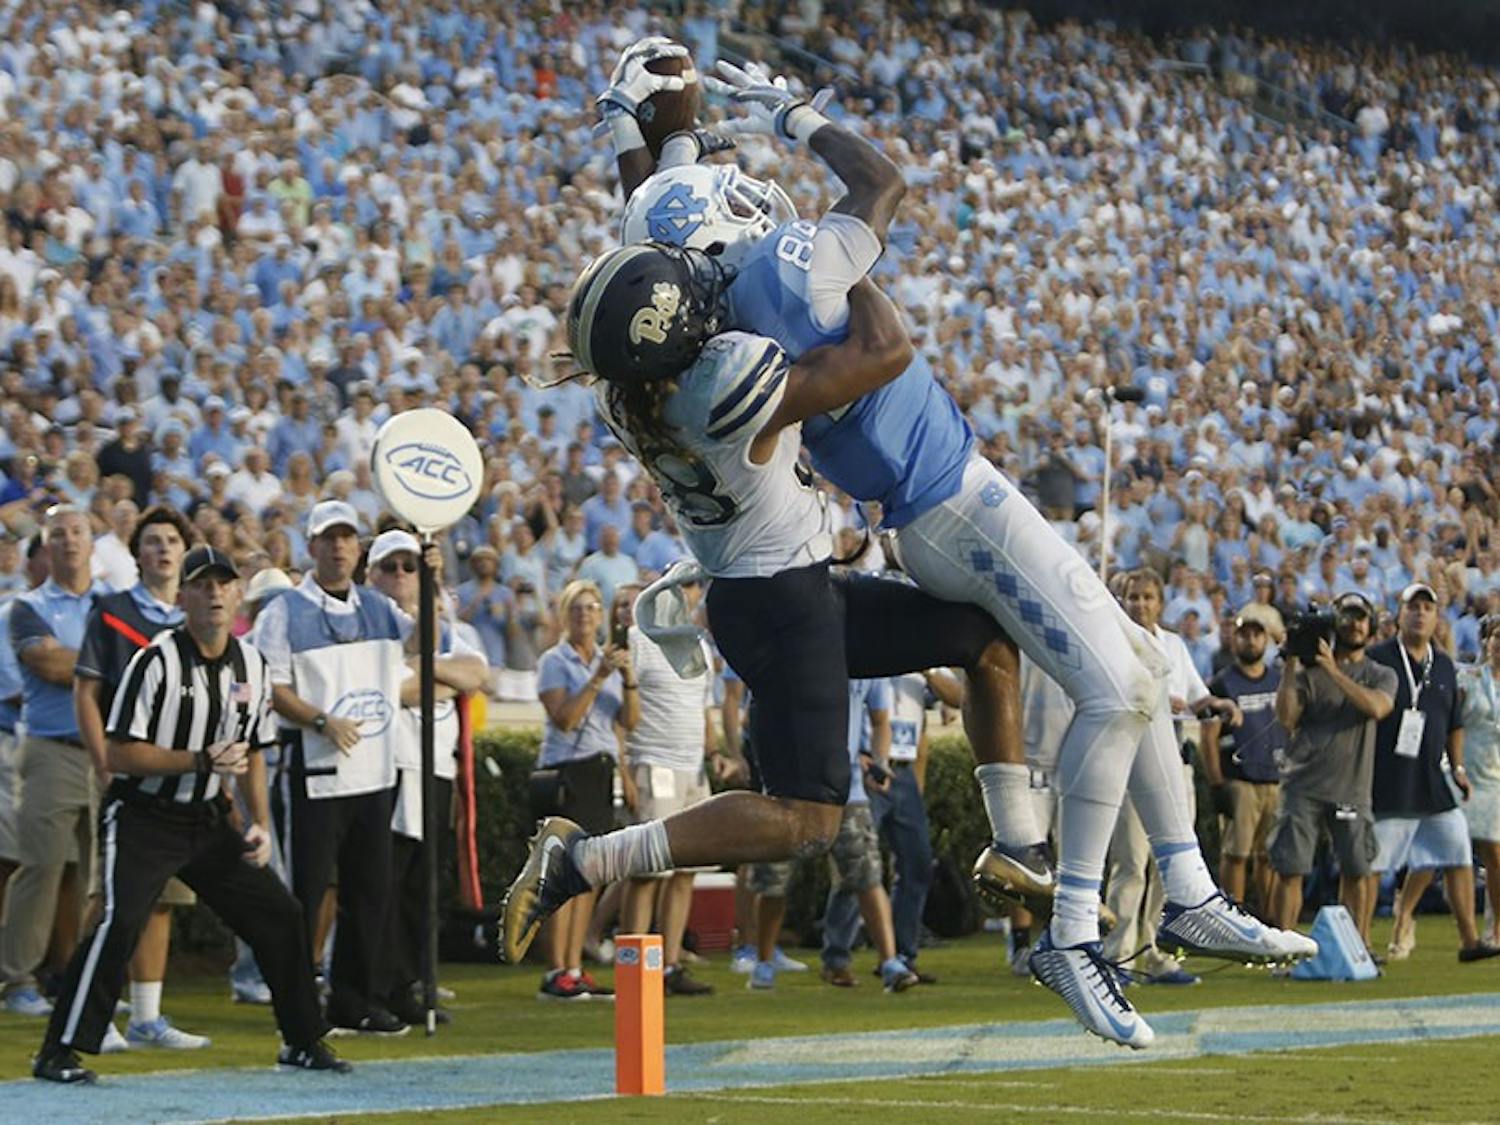 UNC wide receiver Bug Howard catches the game winning touchdown with two seconds remaining in regulation against Pittsburgh.